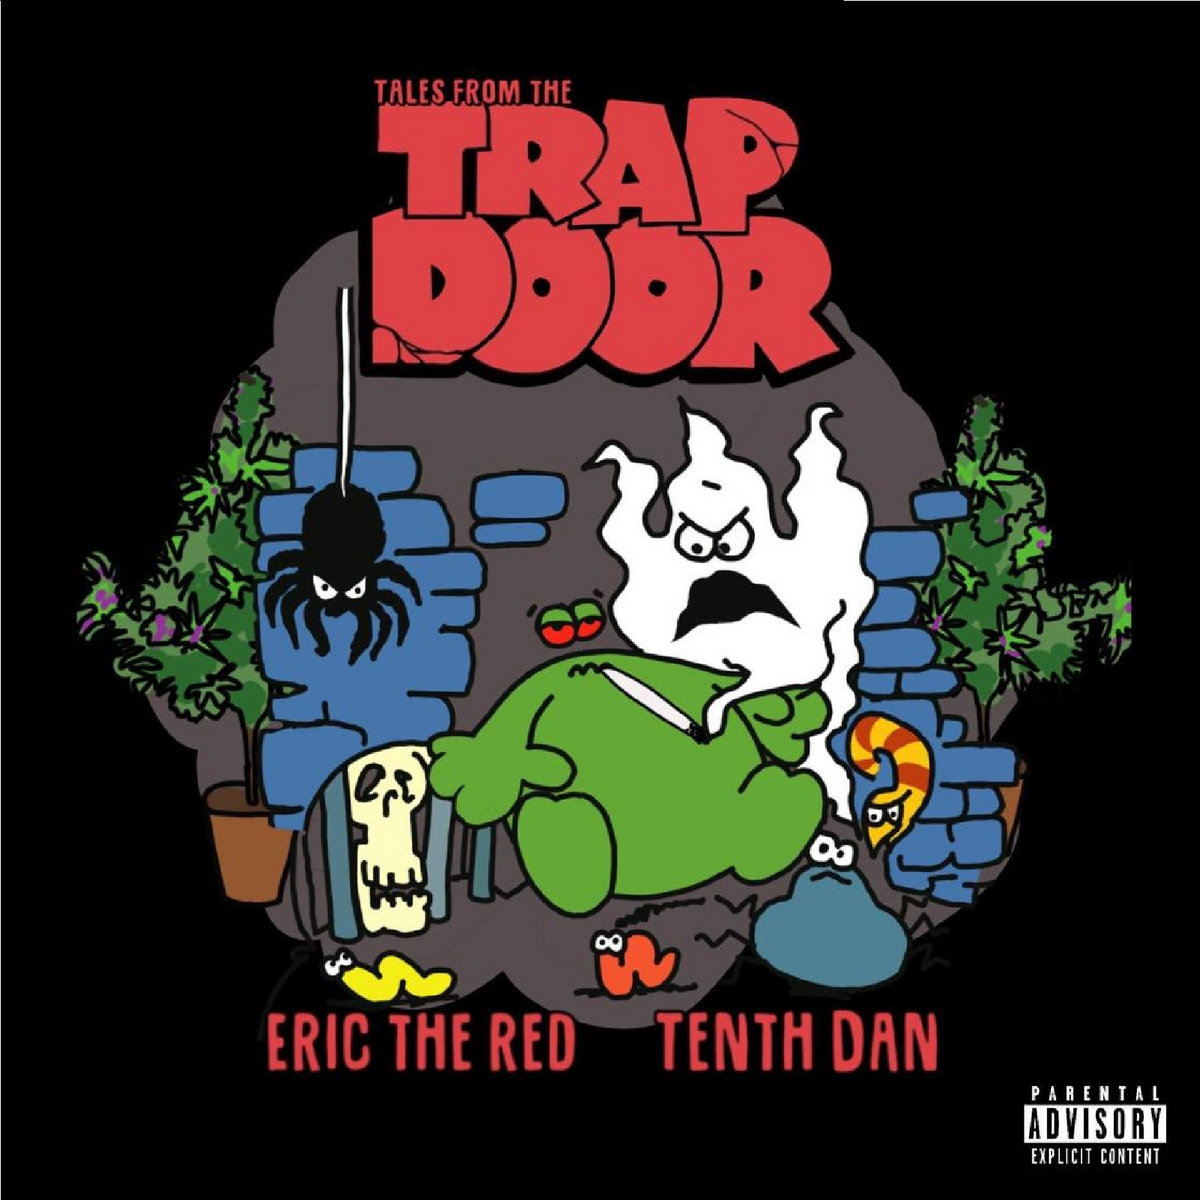 Tales_from_the_trap_door_eric_the_red___tenth_dan